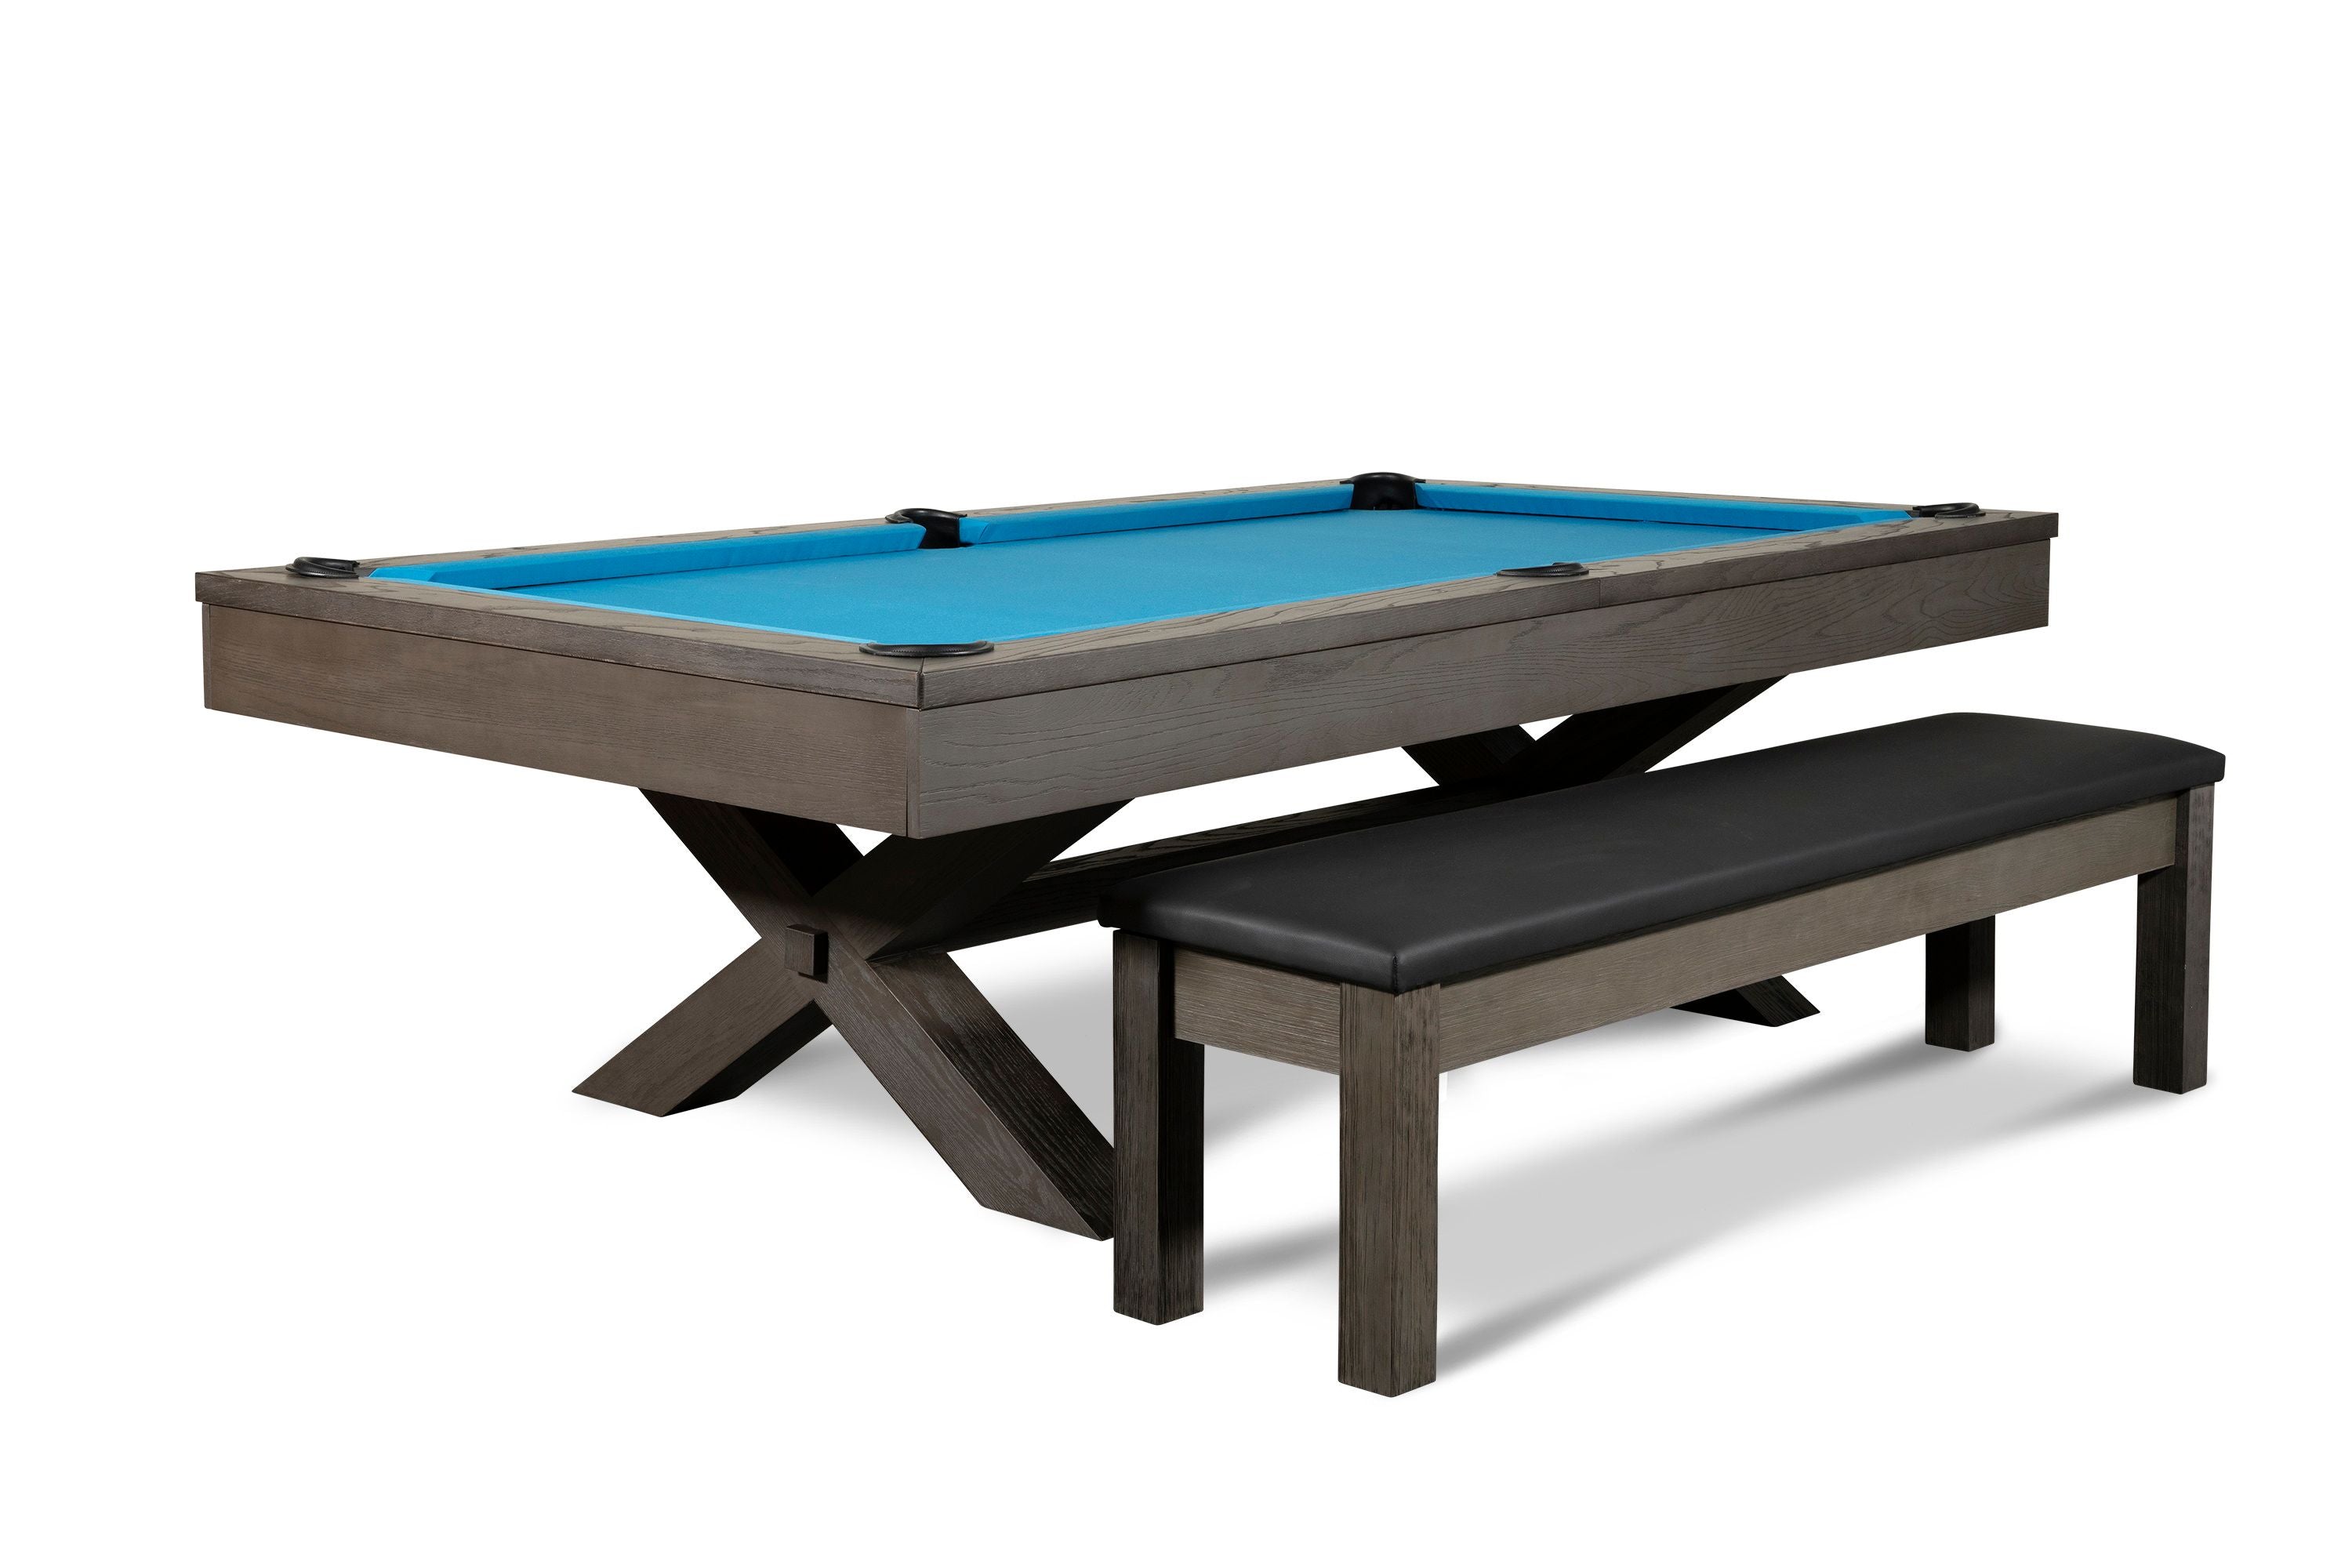 Nixon Billiards CrissyCross Slate Pool Table ISAF 90080/ISAF 90081 Charcoal Blue Fabric With Matching Game Chair